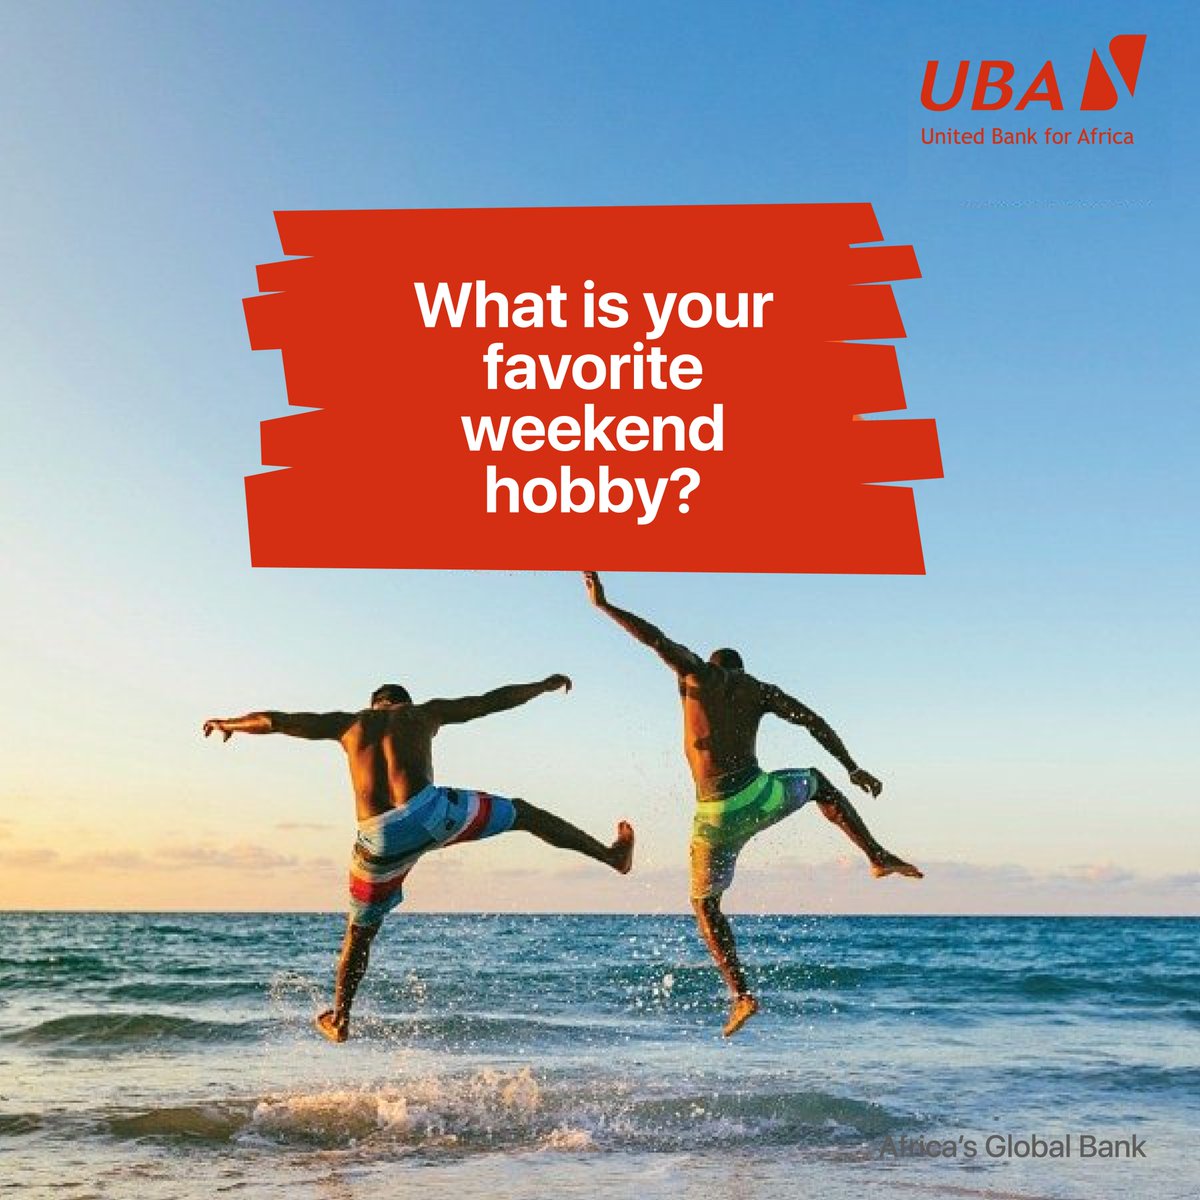 Spending free time doing something productive goes a long way.
What hobbies do you occupy your free time with? 

#InstaHobbies #InstaWeekend
#WeekendVibes #UBAUganda